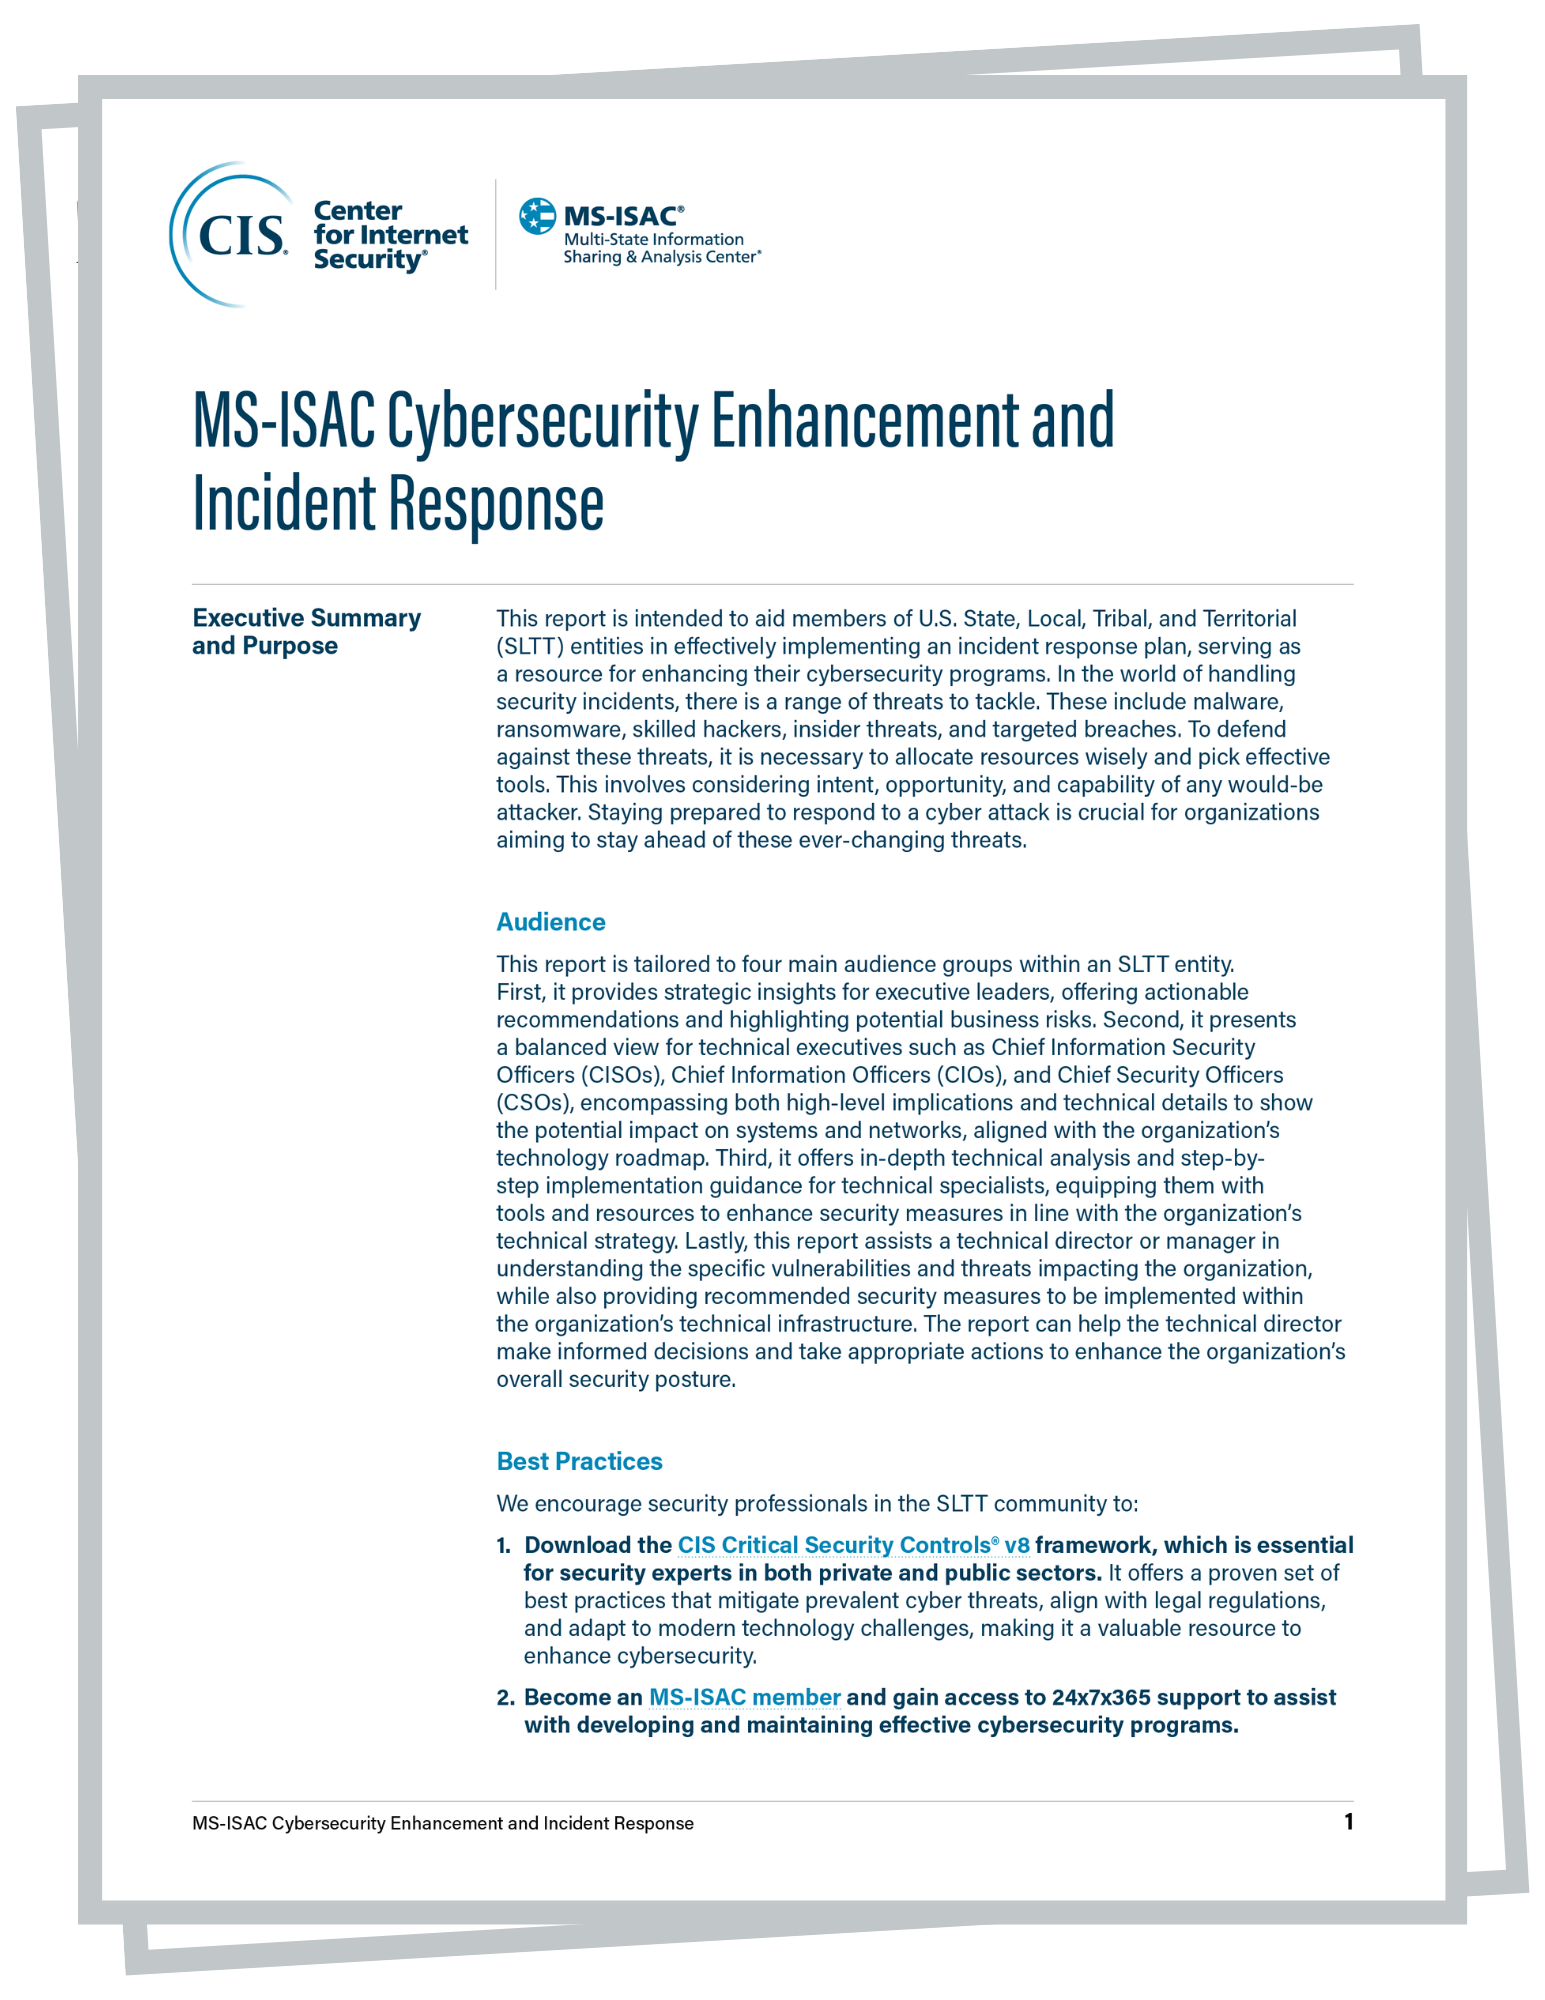 MS-ISAC Cybersecurity Enhancement and Incident Response cover image